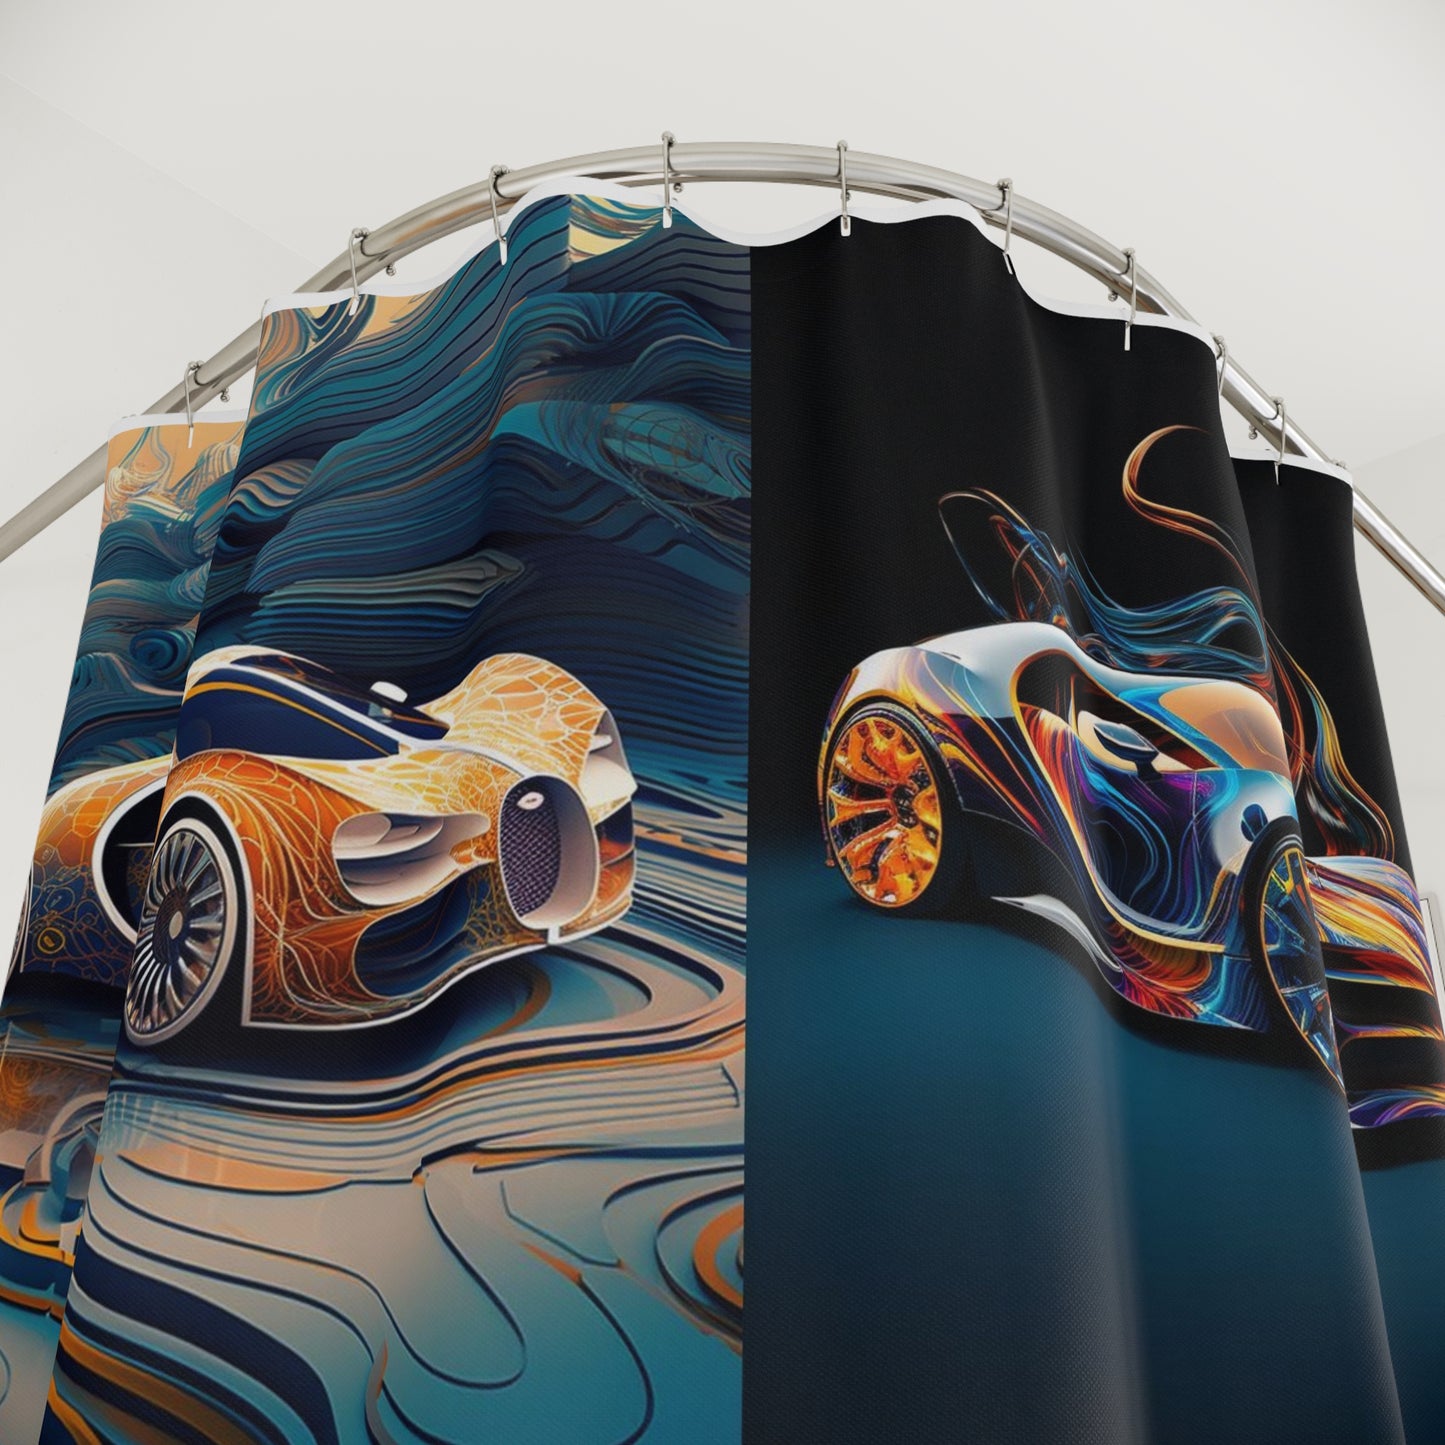 Polyester Shower Curtain Bugatti Abstract Flair 5